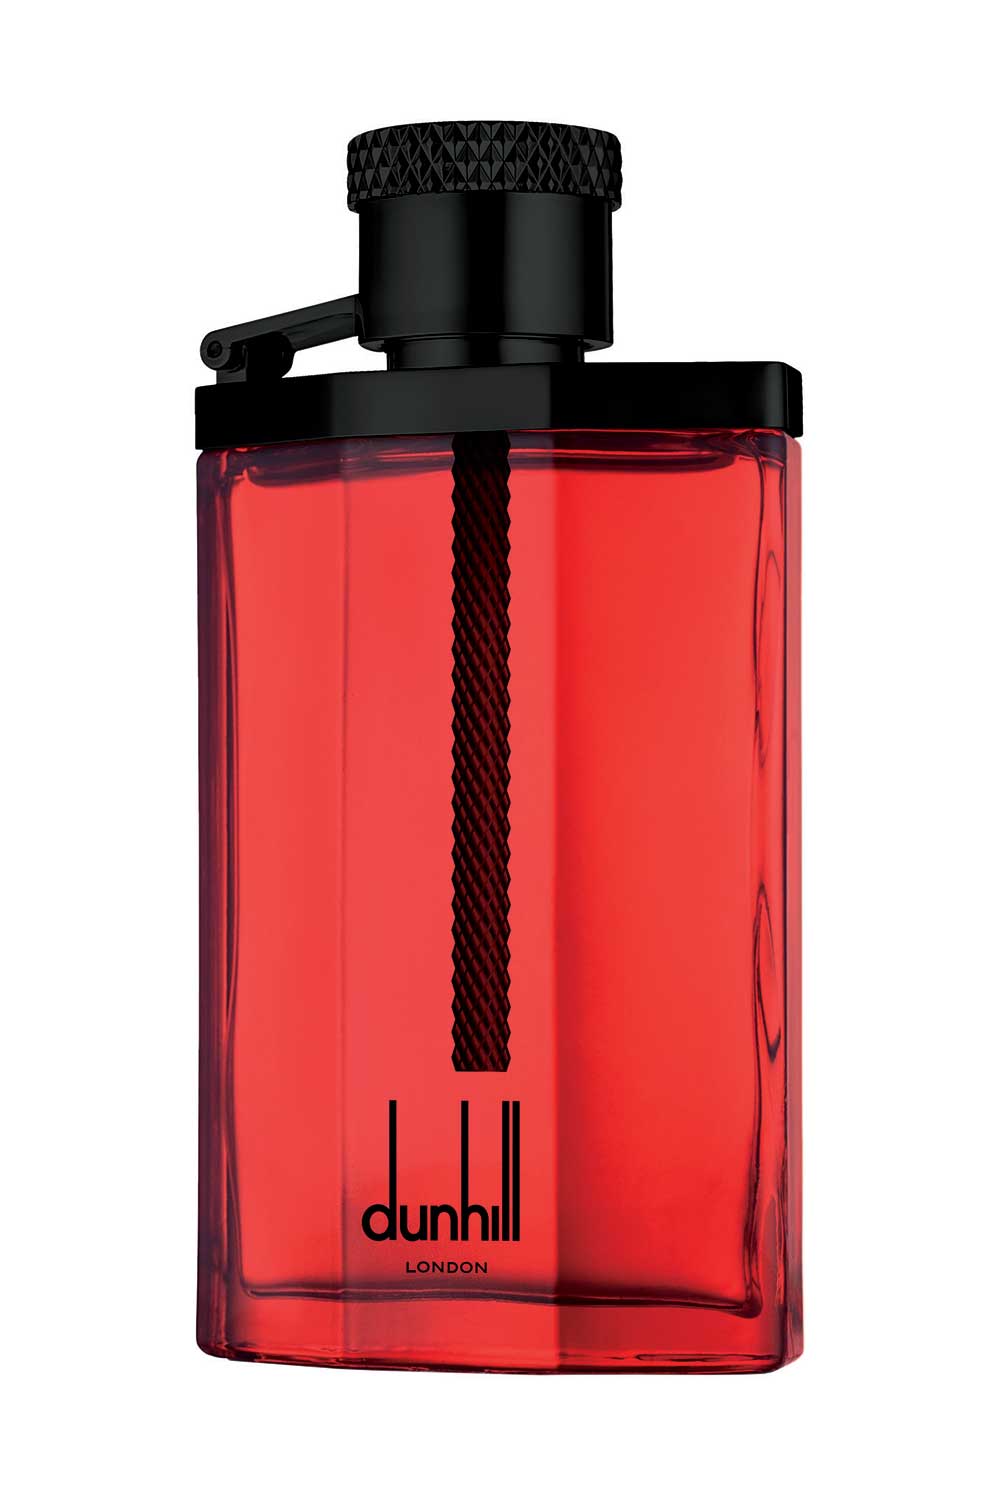 dunhill desire red gift set